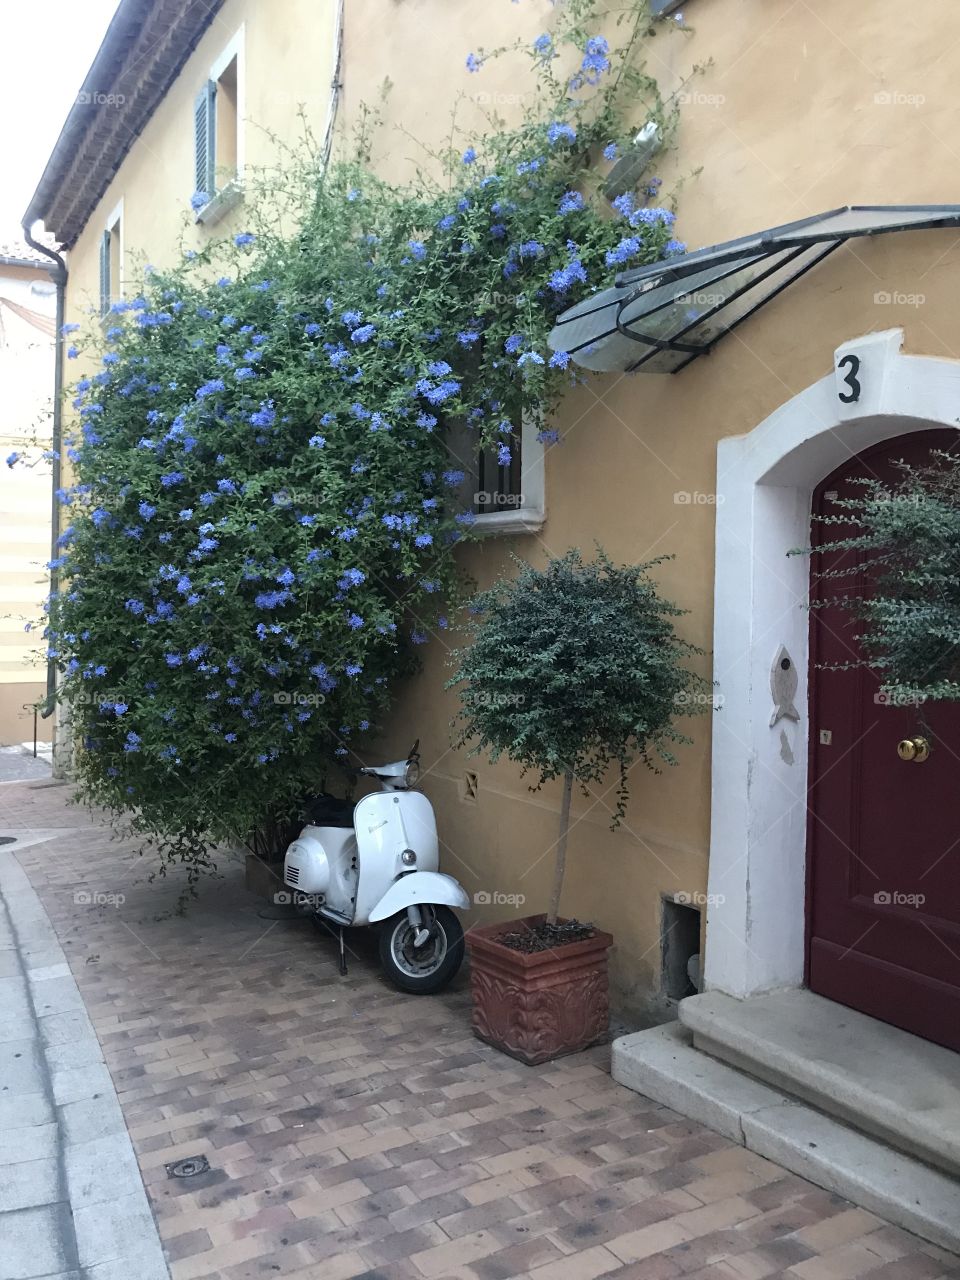 Purple flower with a scooter in front of a yellow house